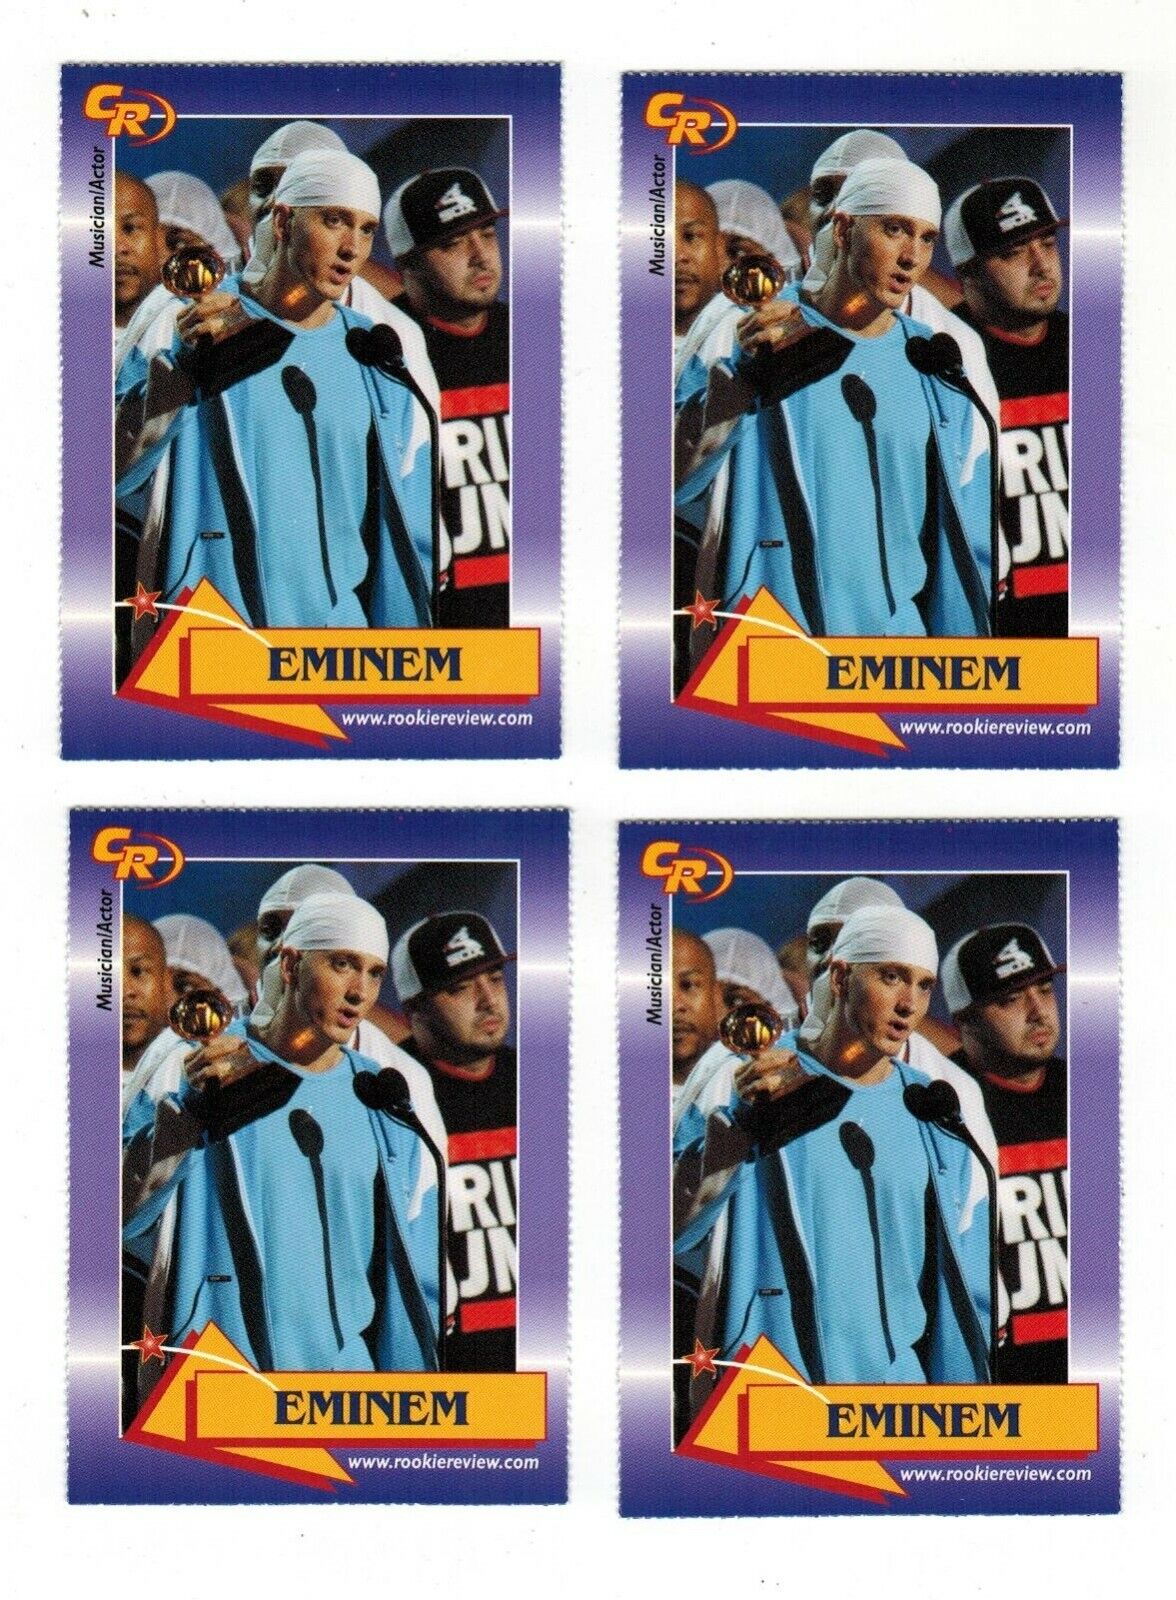 (4)x Eminem Music Actor Celebrity Review 2003 Trading Card Lot